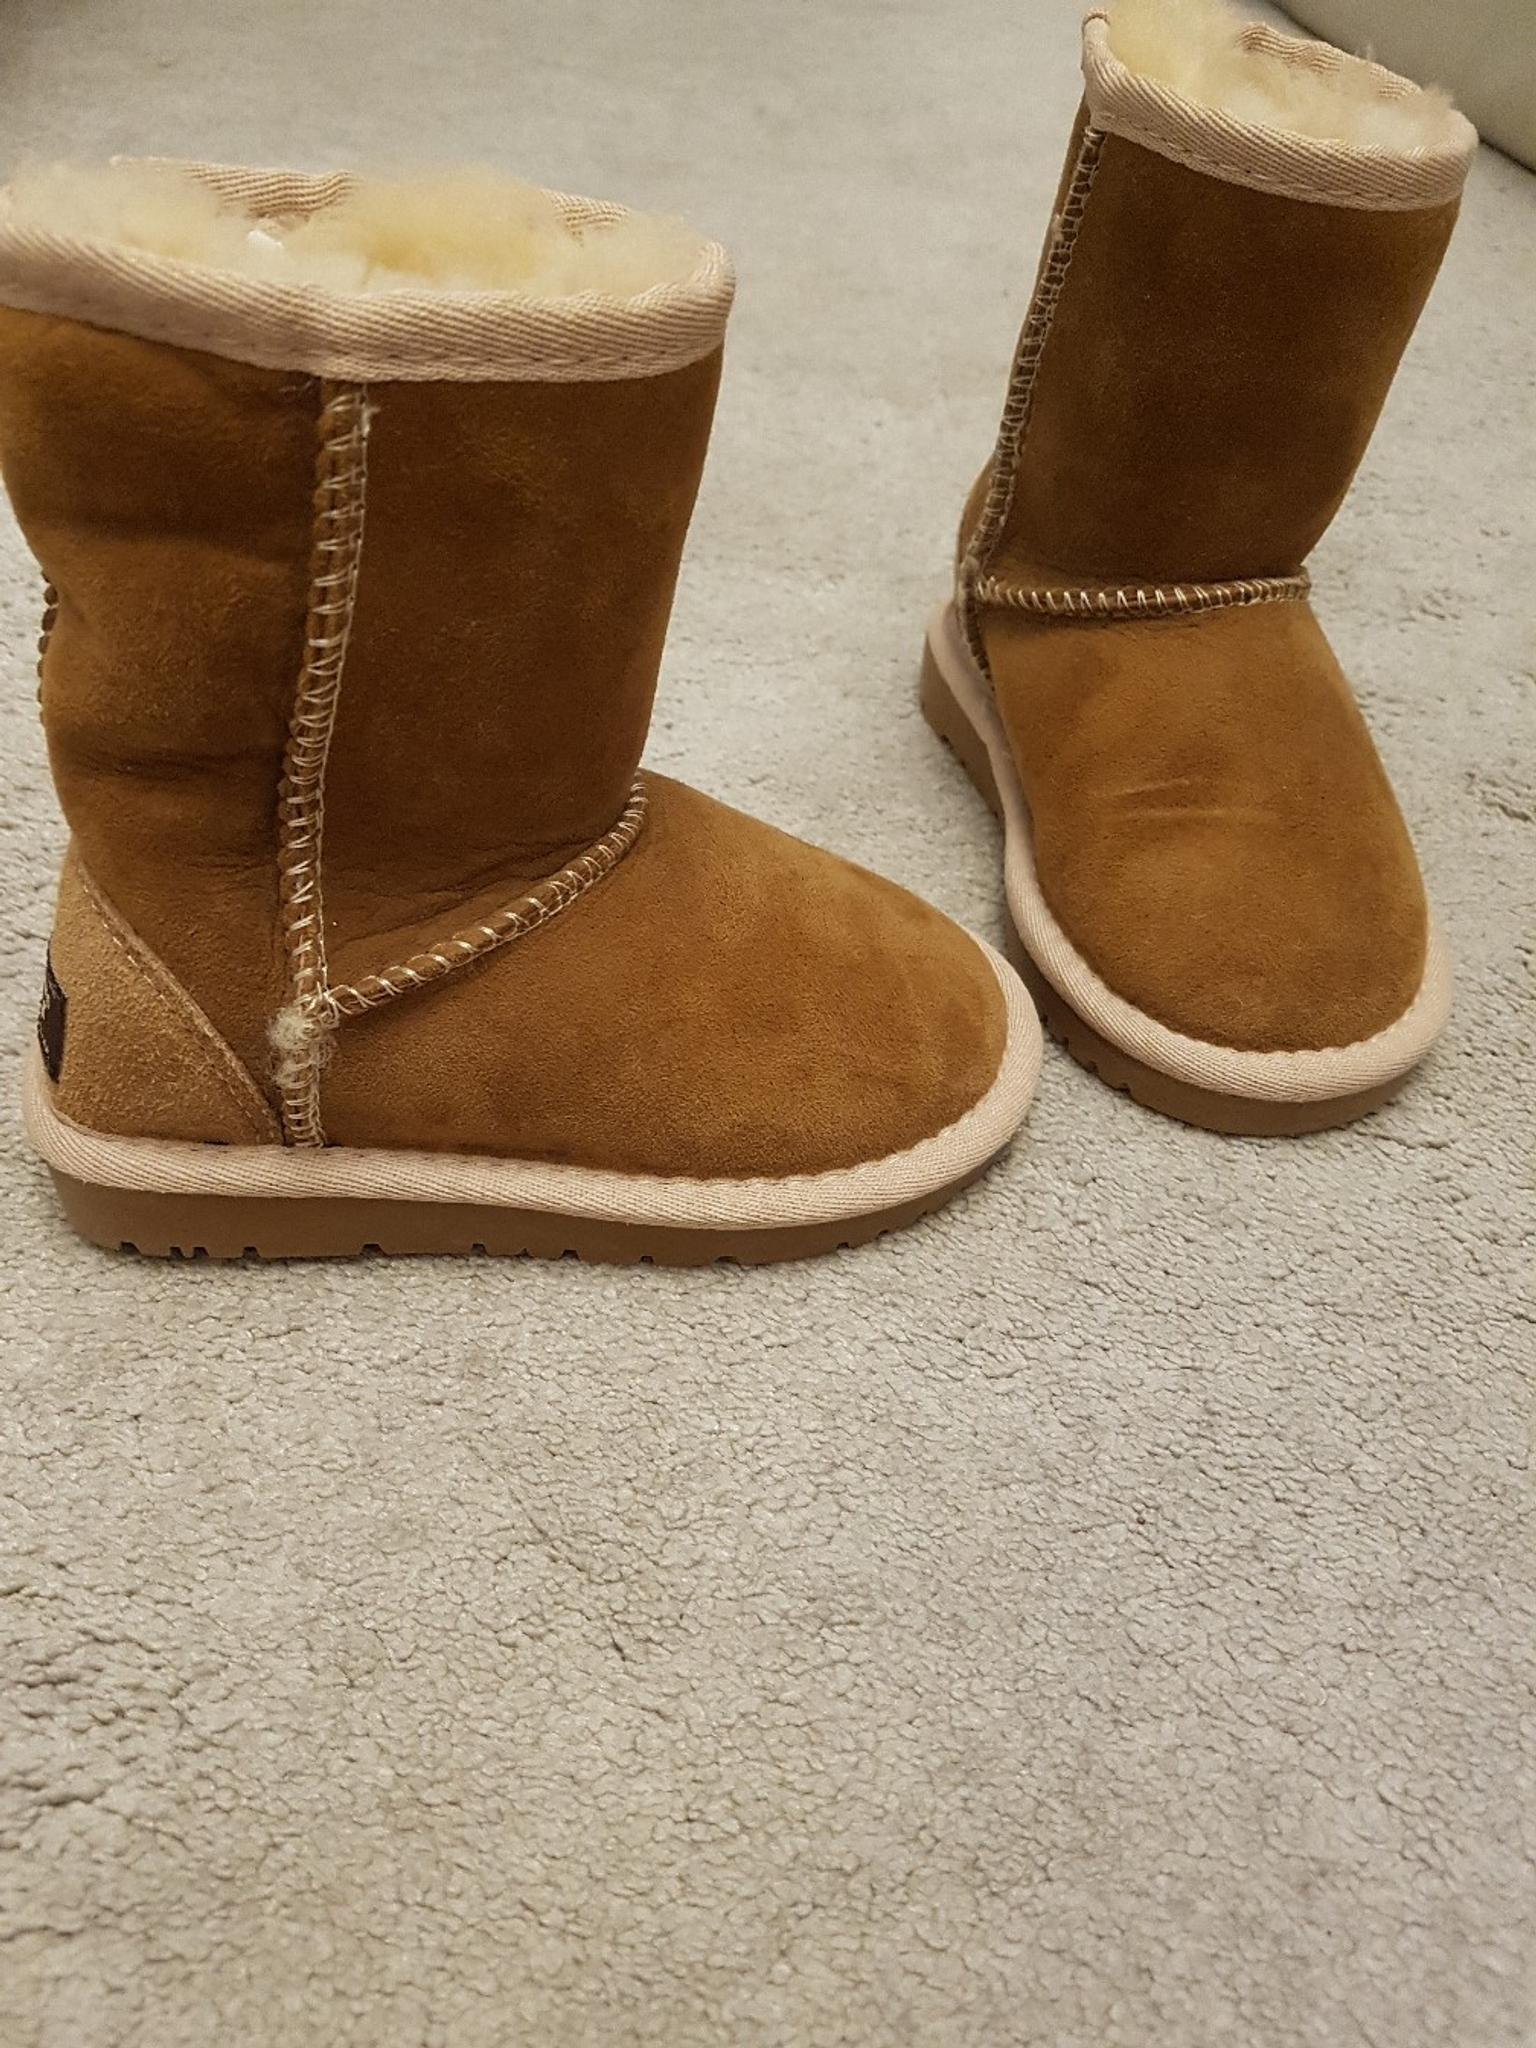 kids uggs size 7